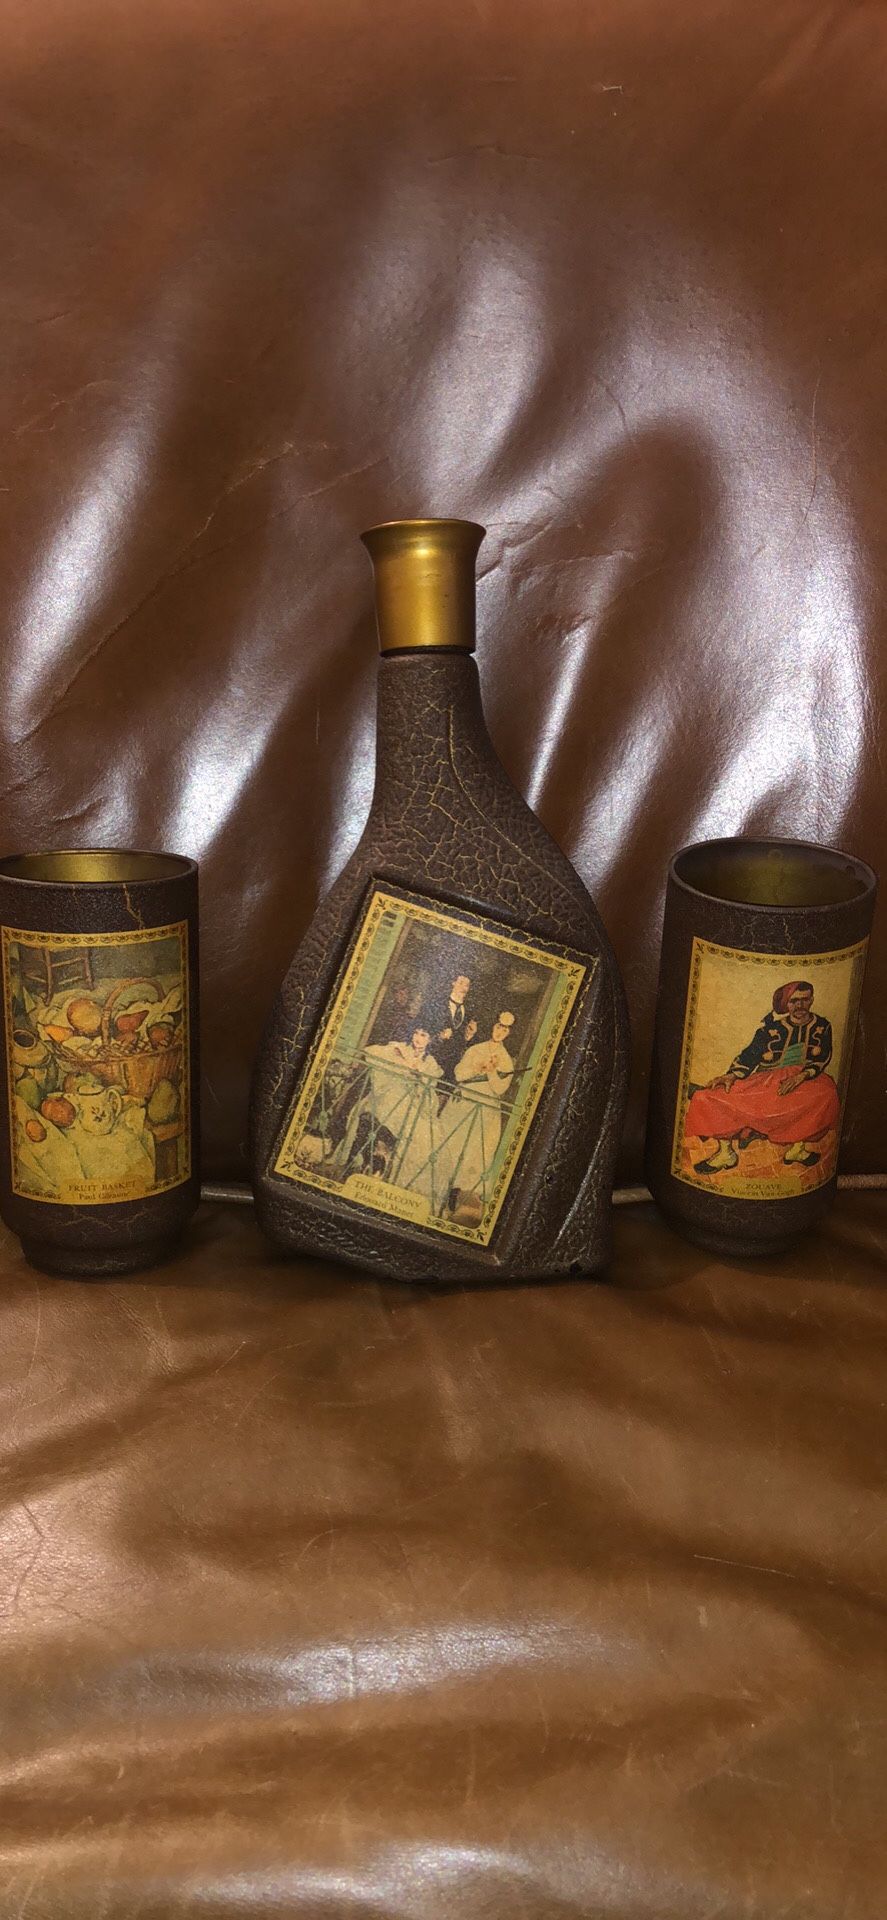 Vintage Masters bottle and cup collection